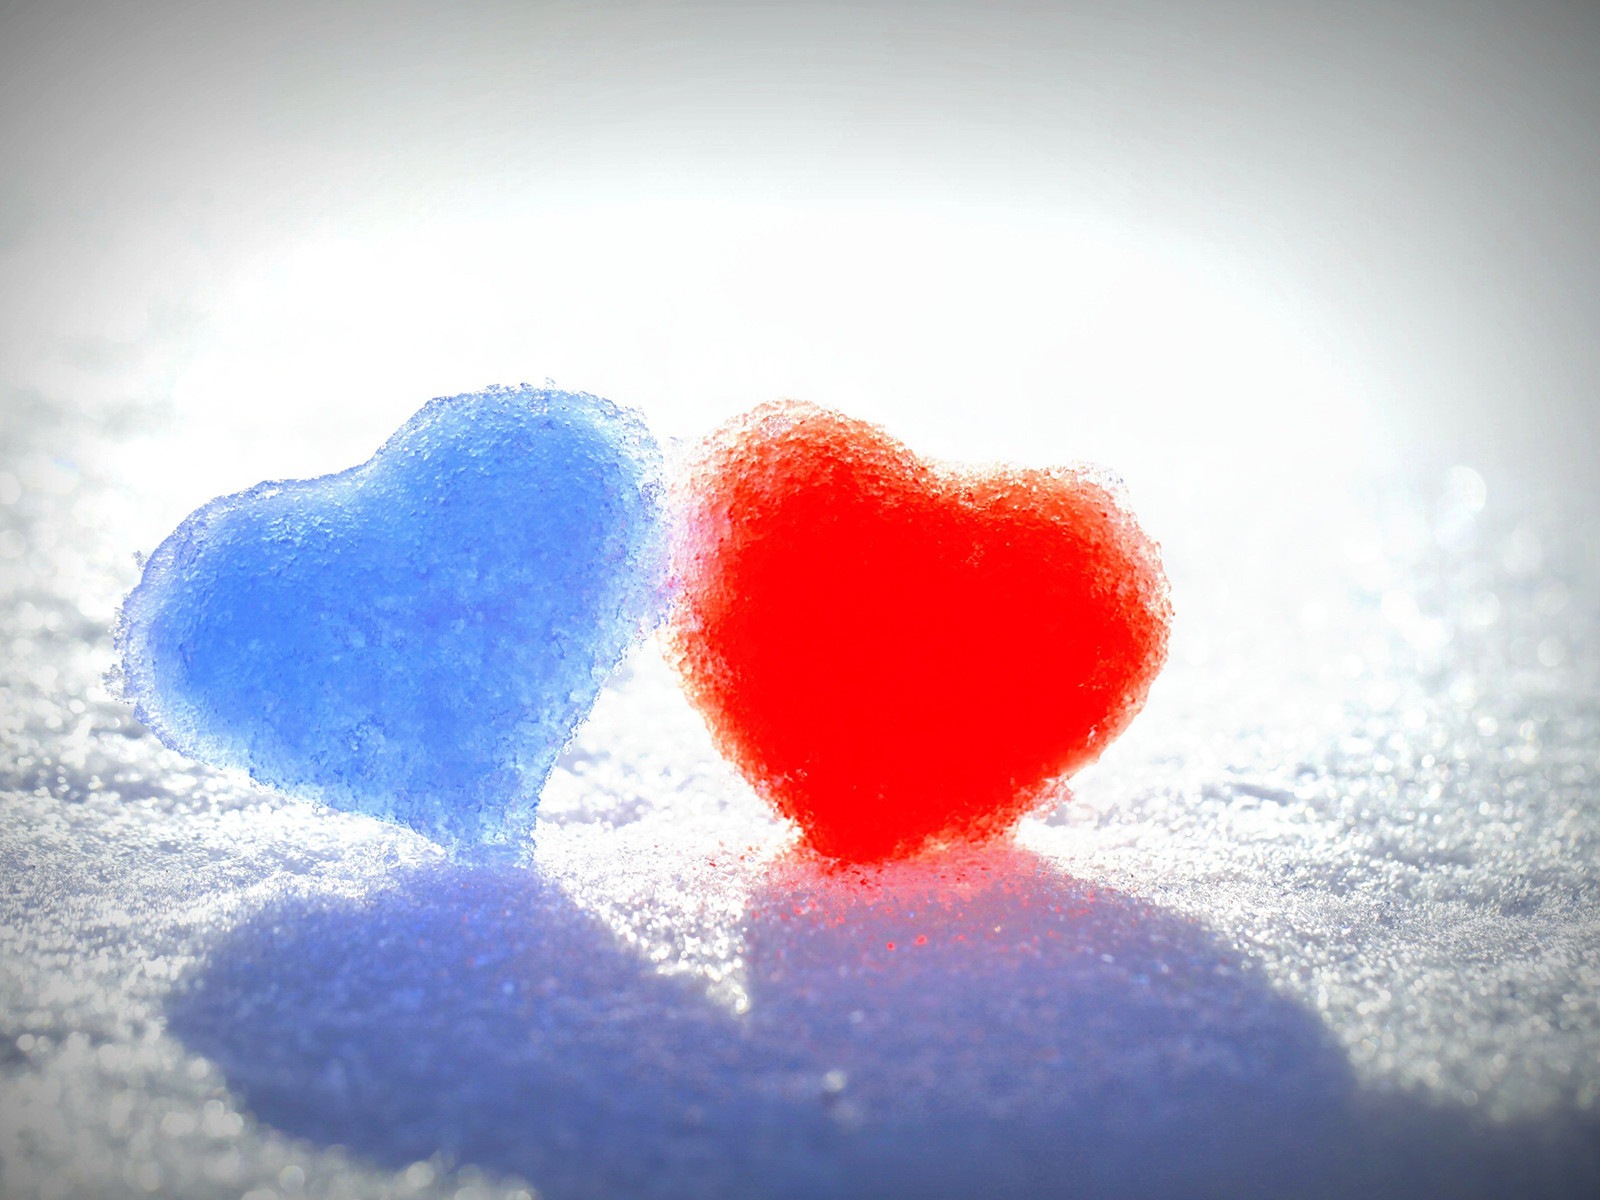 The theme of love, creative heart-shaped HD wallpapers #13 - 1600x1200